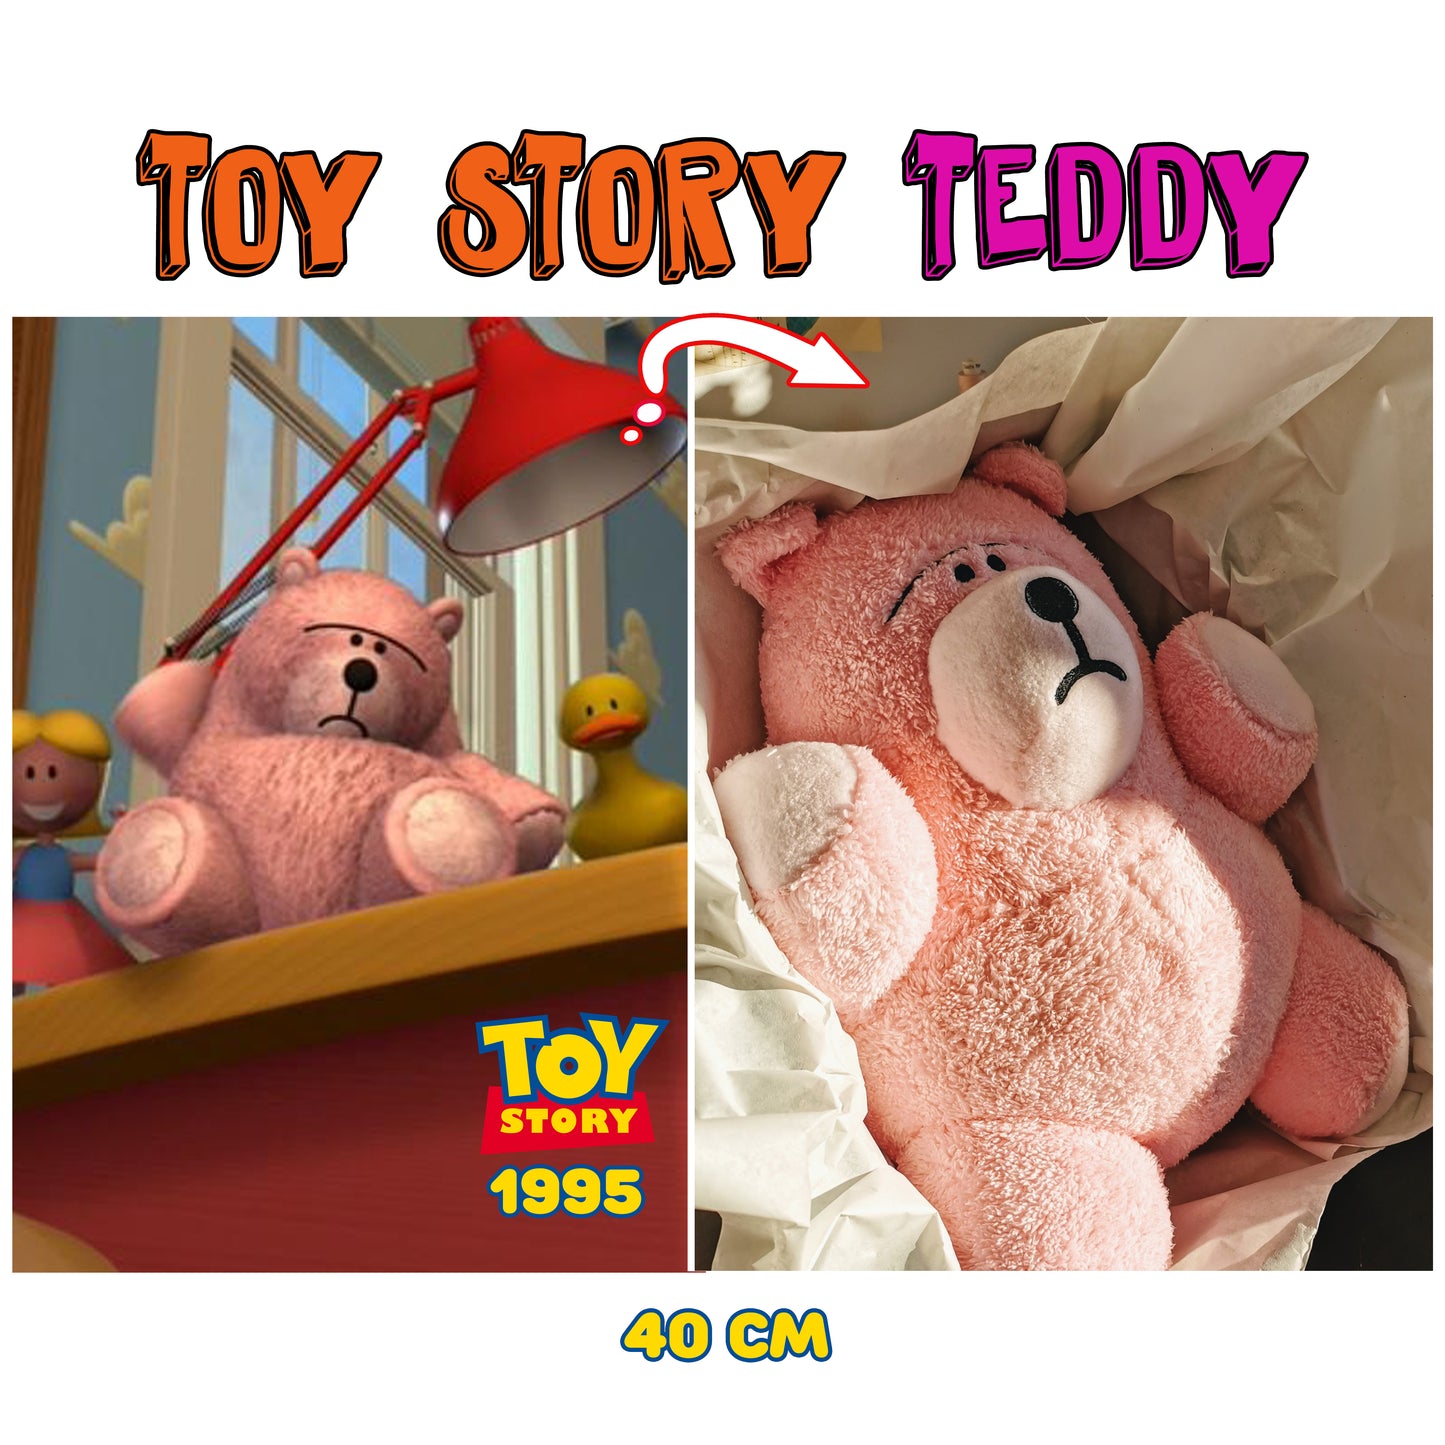 Pink Bear Plush Replica based on Toy Story character, Toy Story 1995 Replica Bear, 40 cm